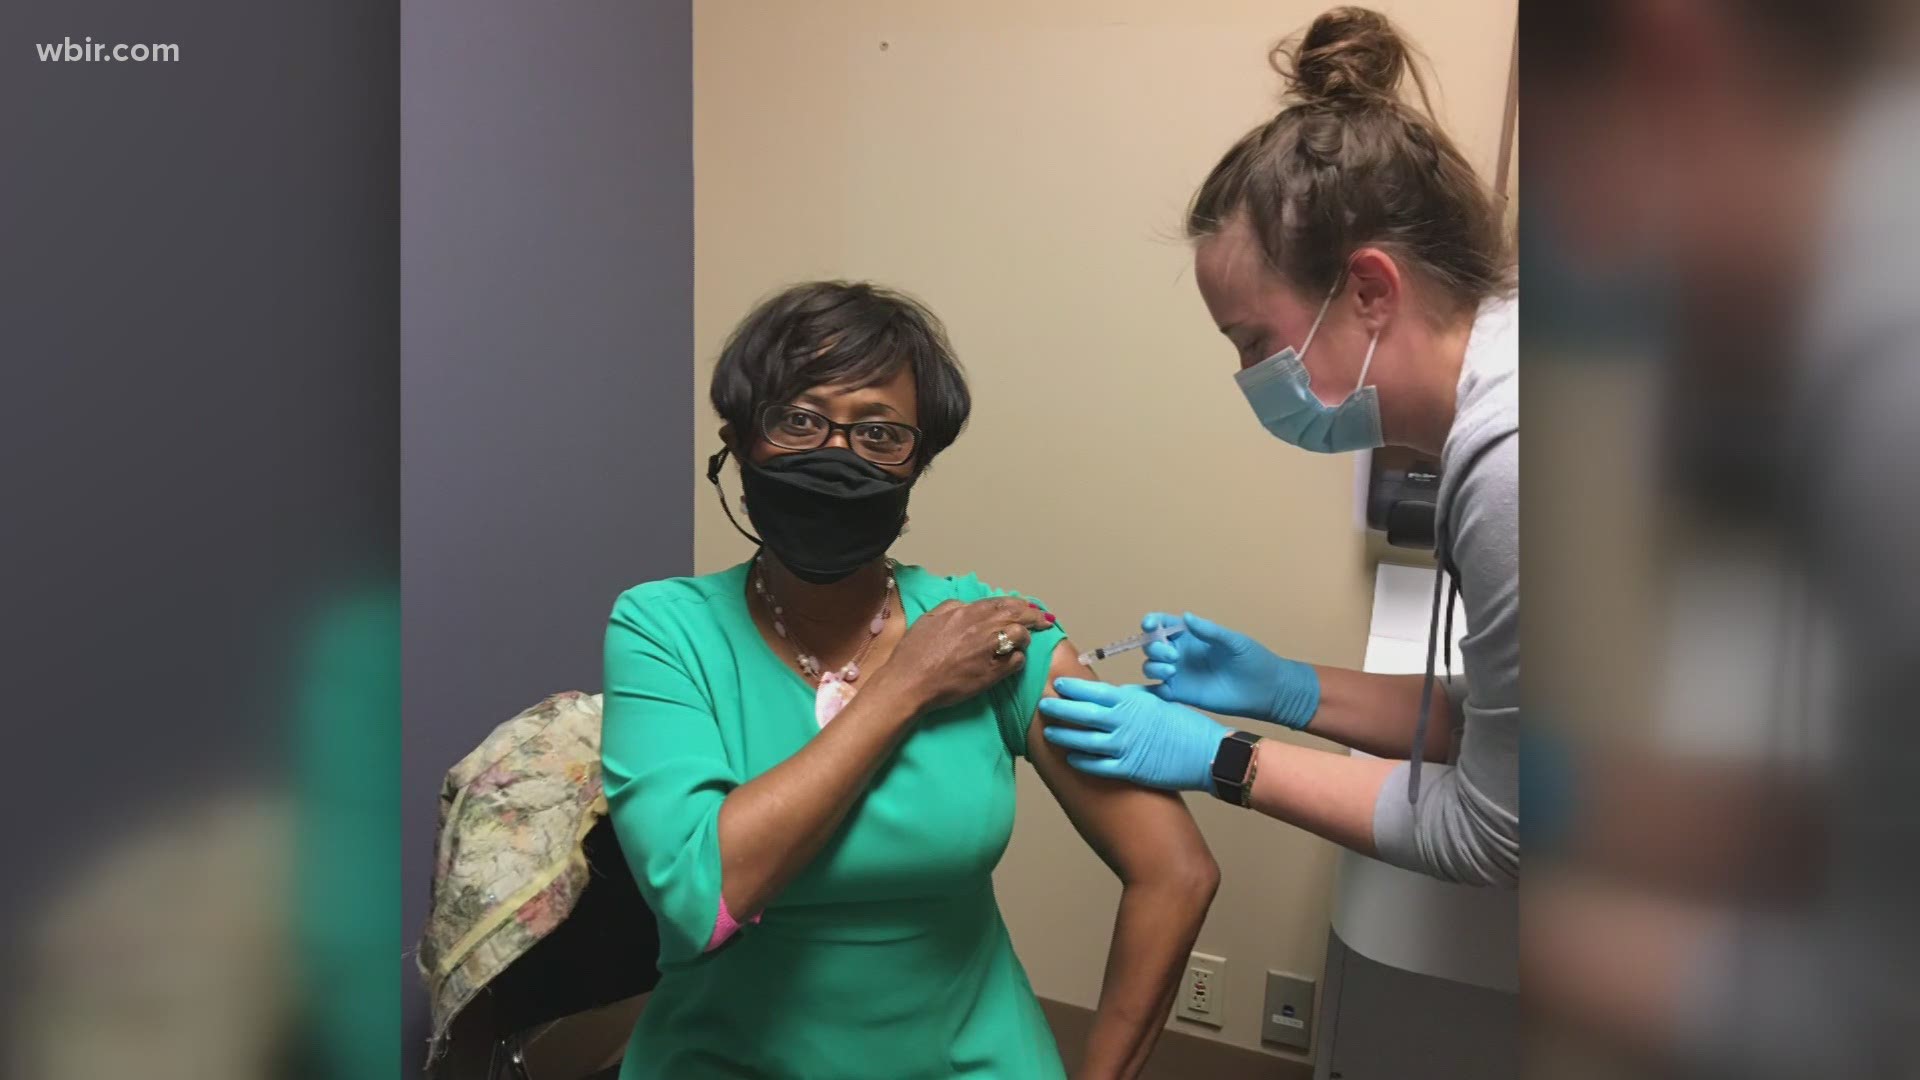 Officials said that vaccine trials across the U.S. are in need of more minority participants. One Knoxville woman is trying to help with that.